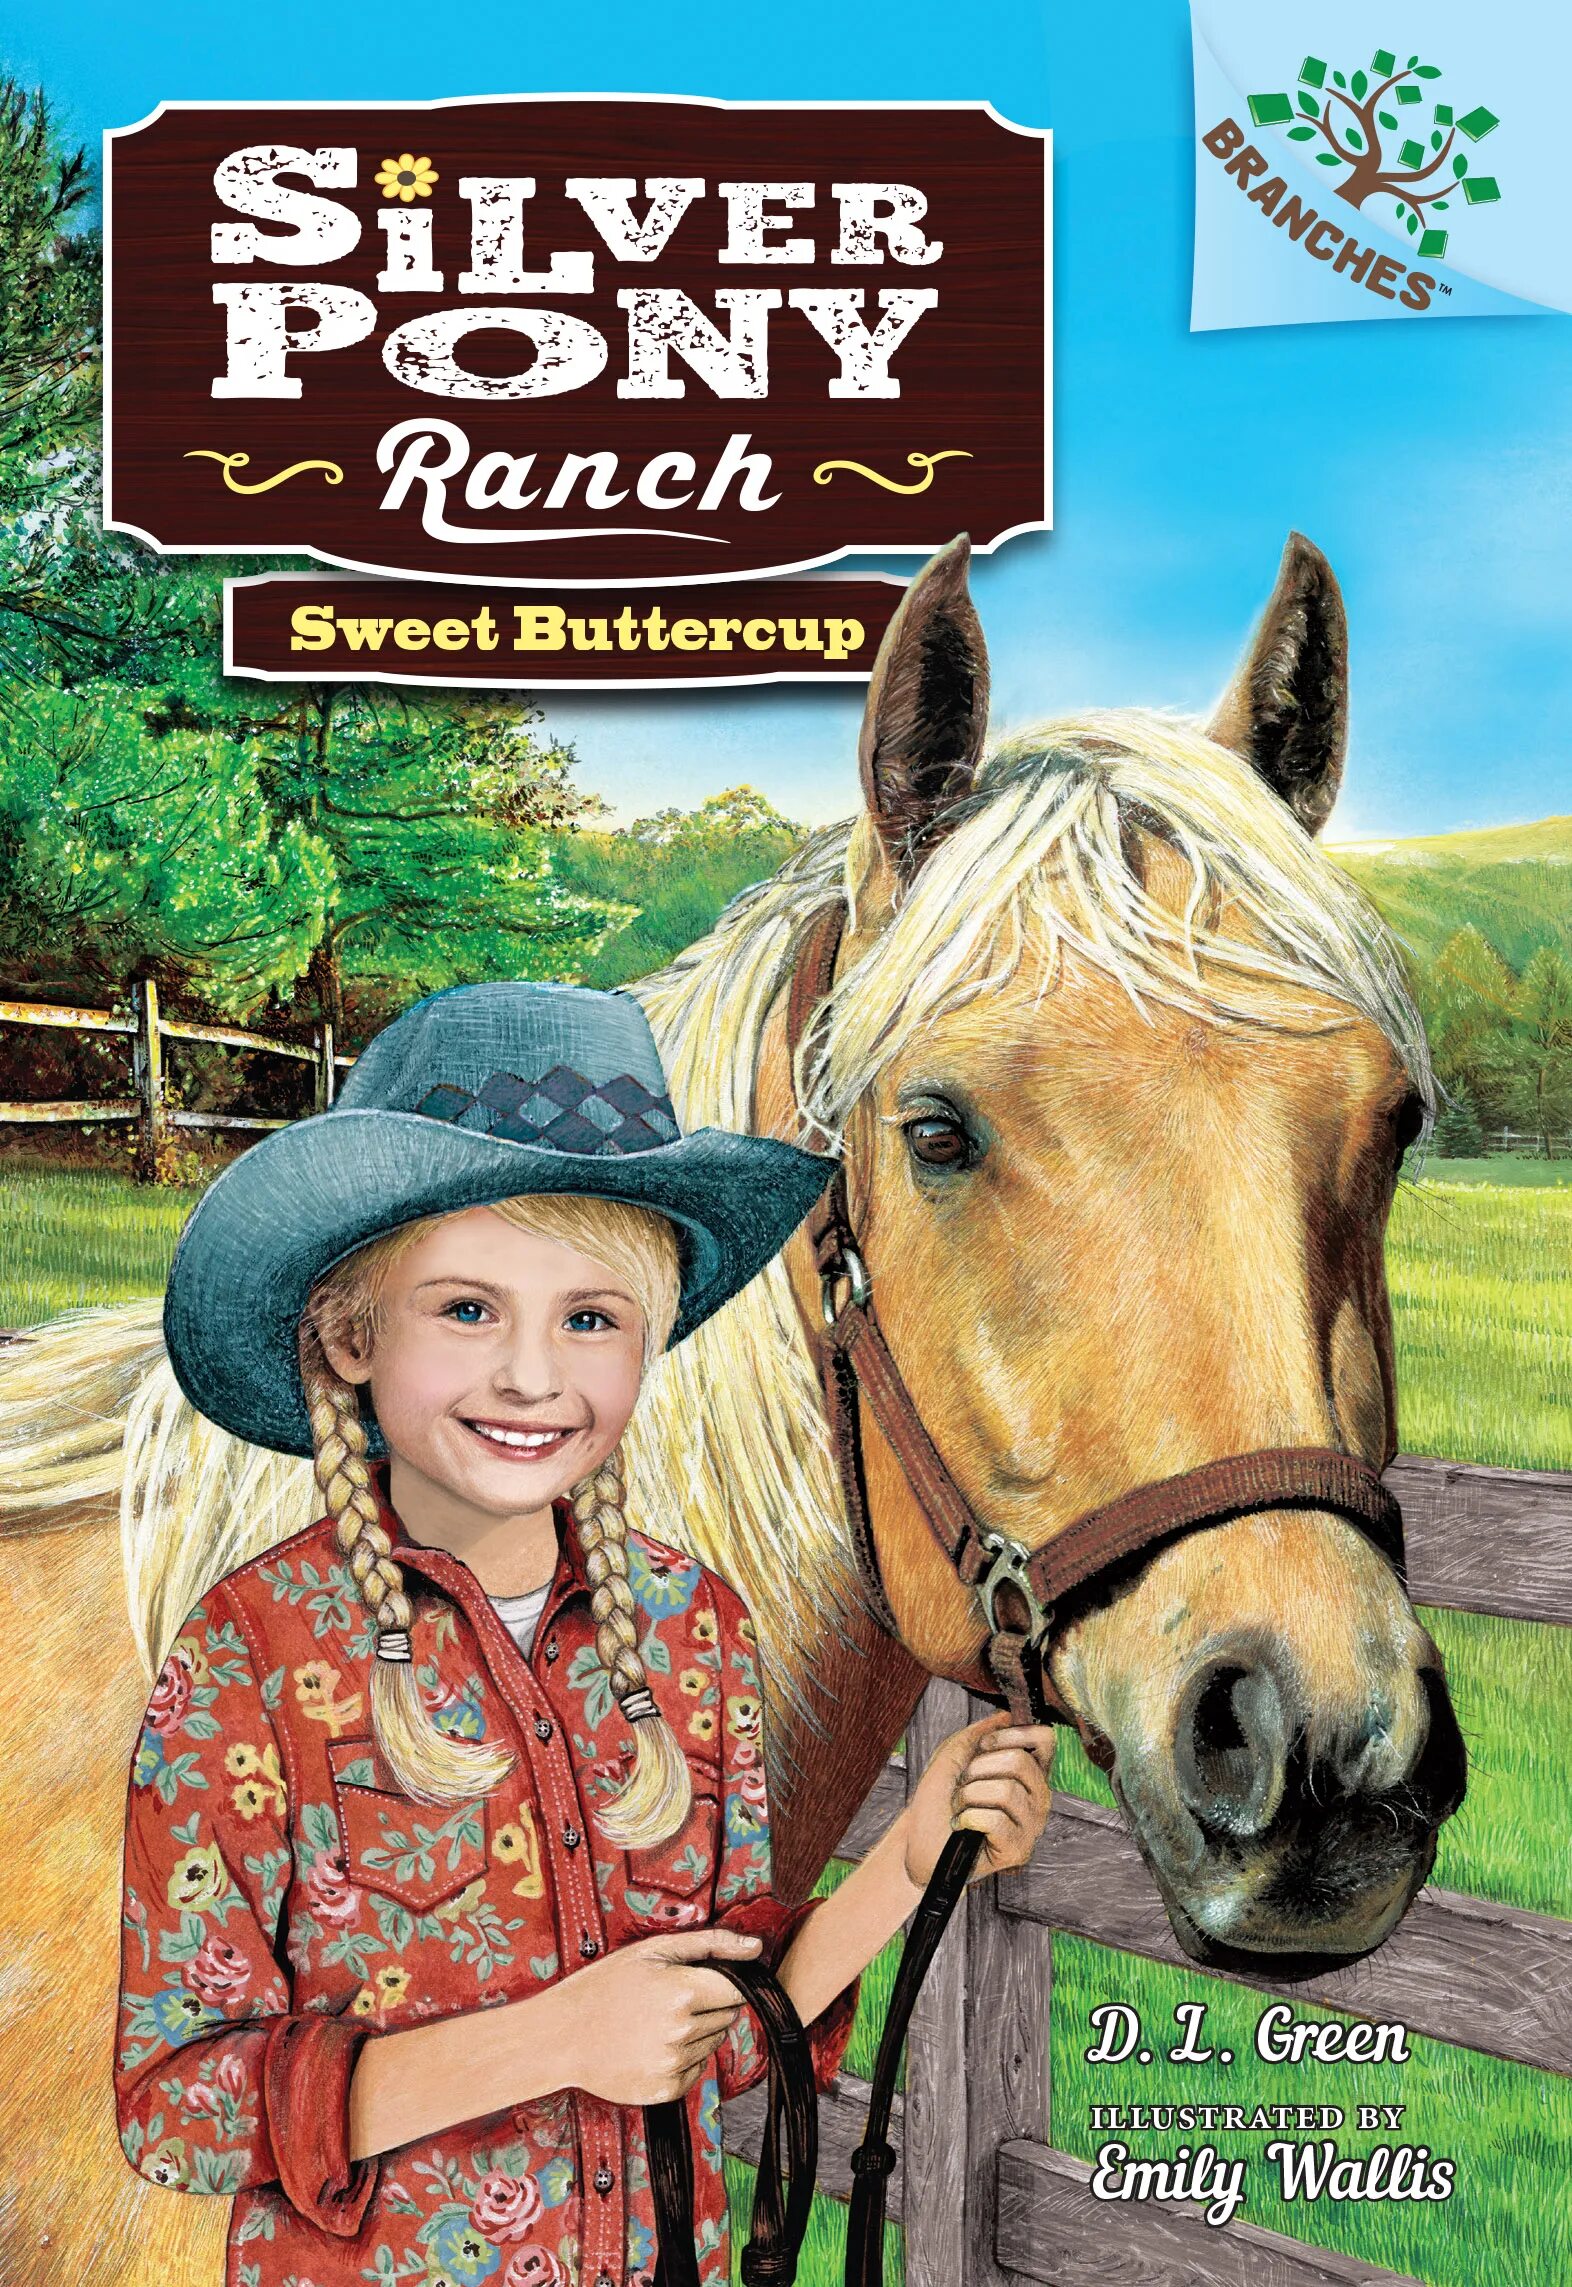 Sweet Buttercup. Pony Ranch. Buttercup. Sweet book